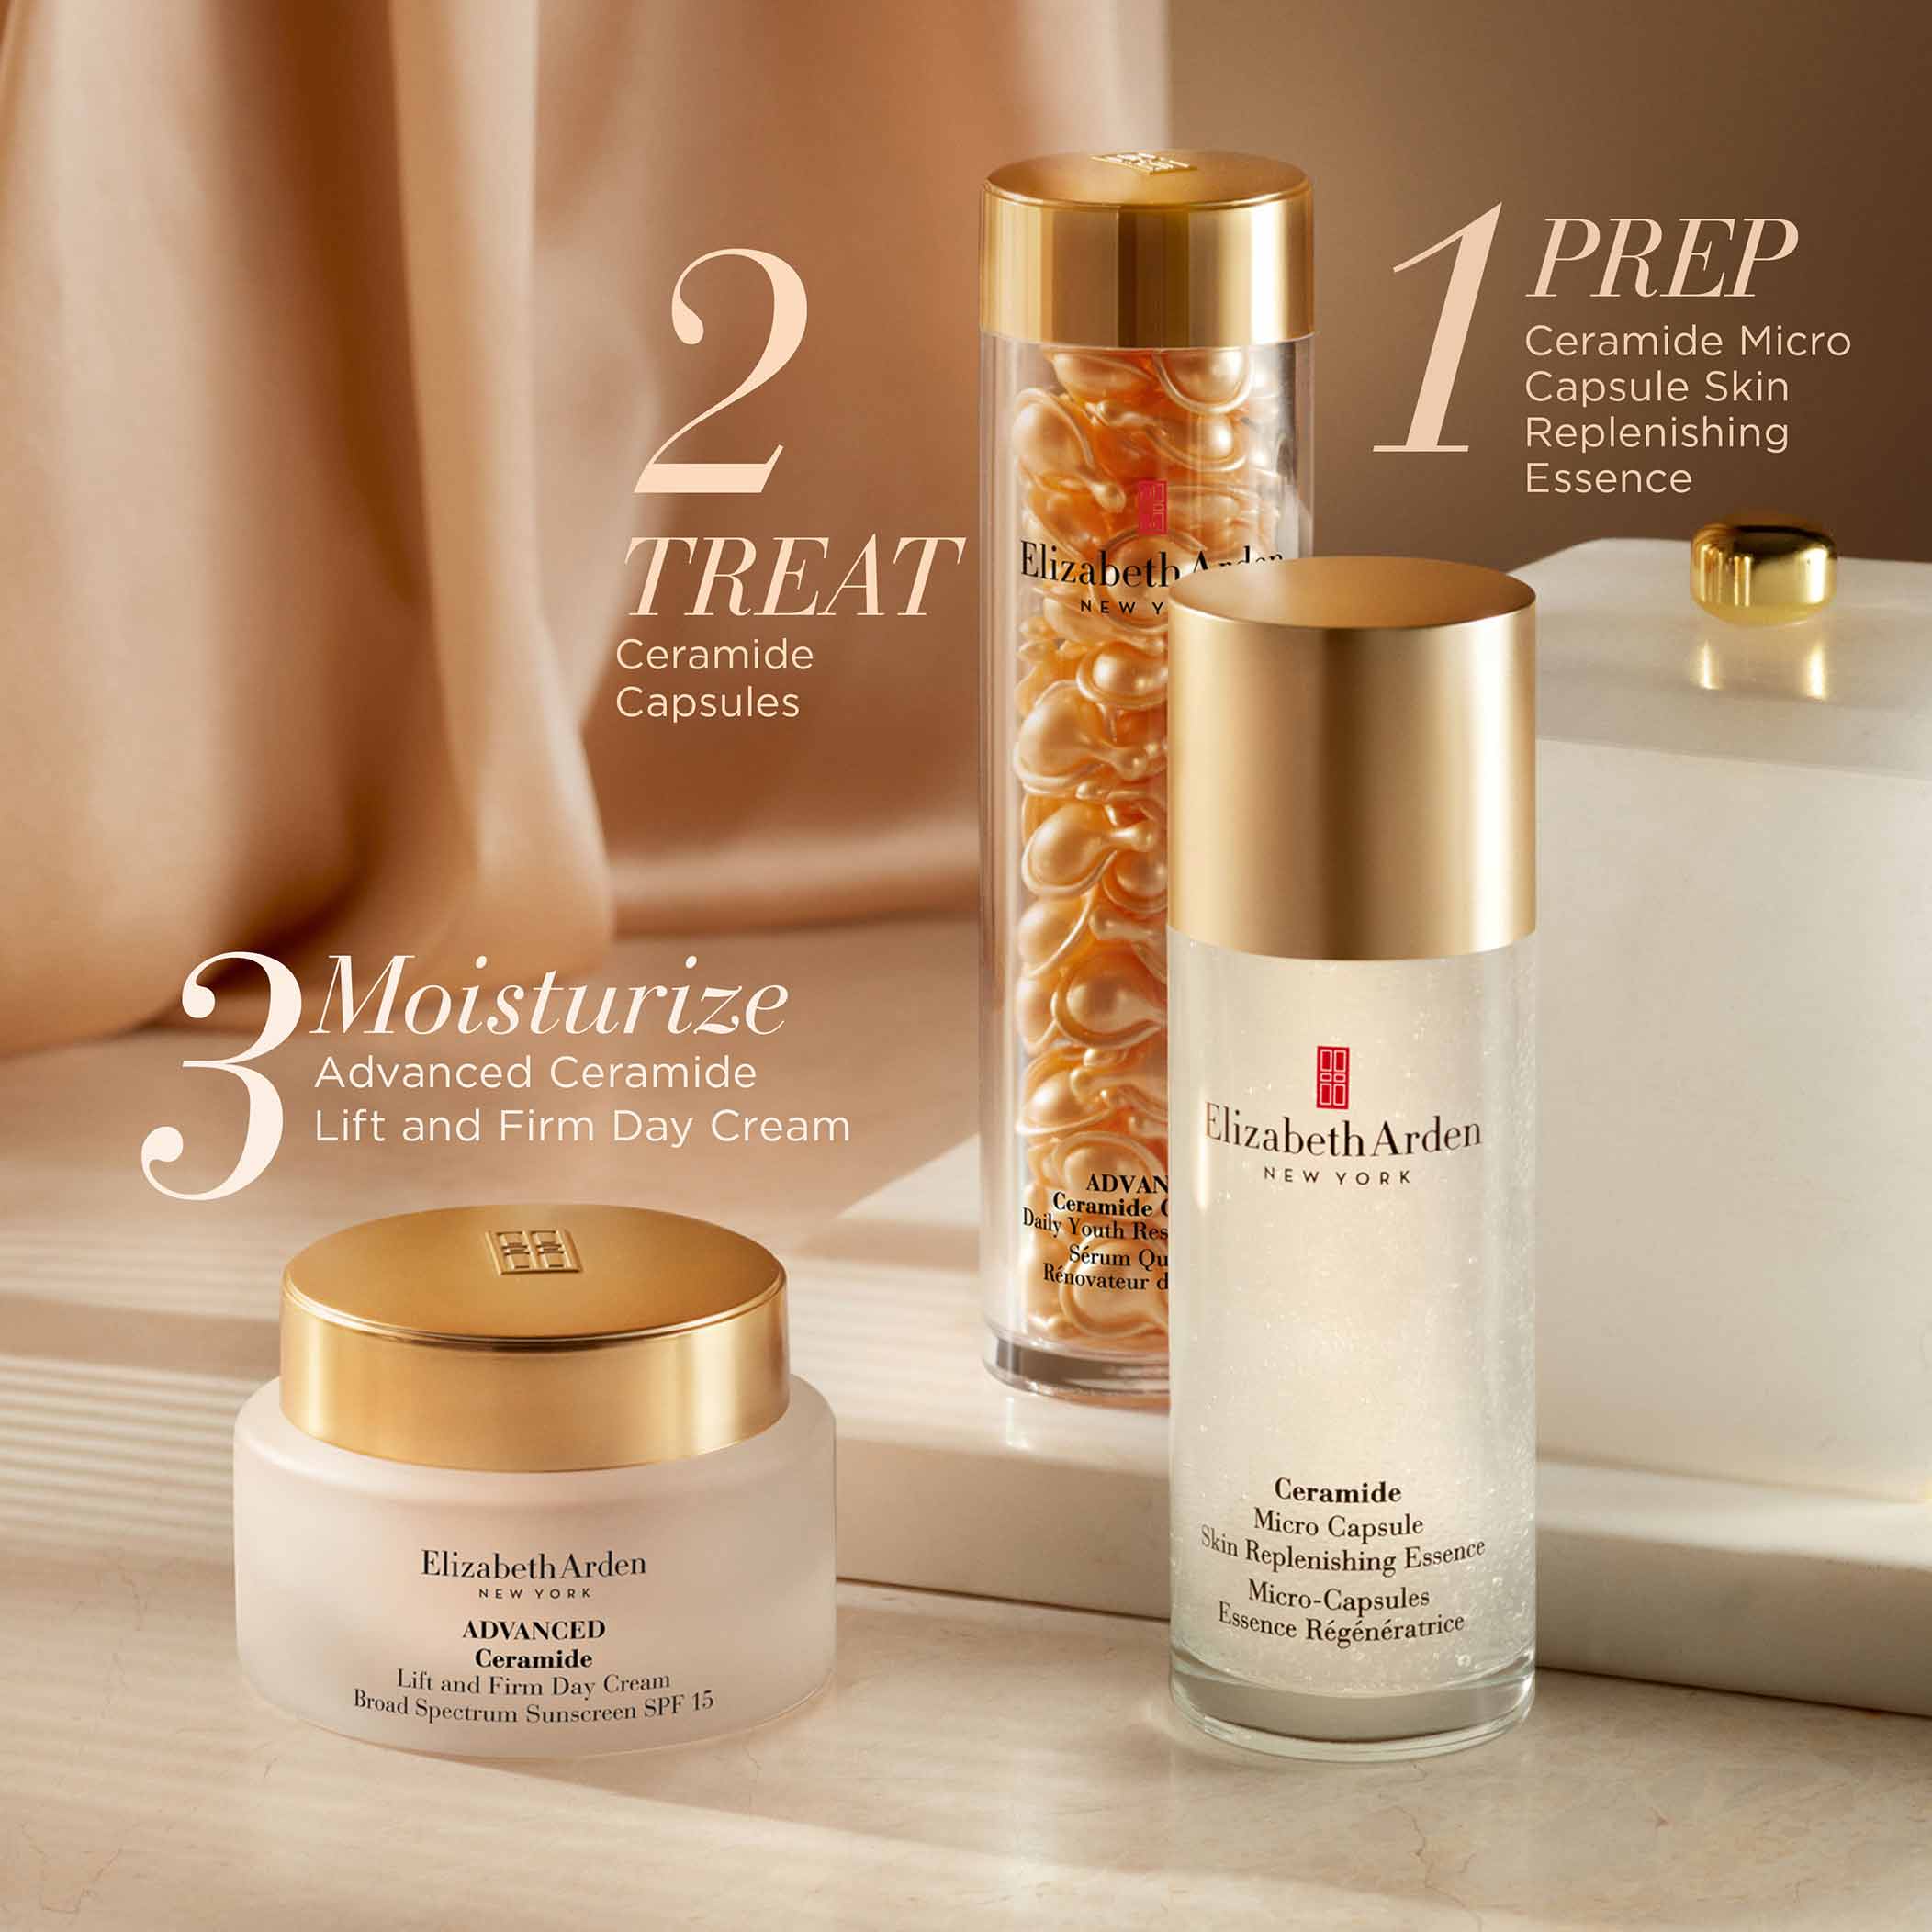 1 Prep with Ceramide Micro Capsule Skin Replenishing Essence, 2 Treat with your choice of Ceramide Capsules and 3 Moisturize with Advanced Ceramide Lift and Firm Day Cream SPF15